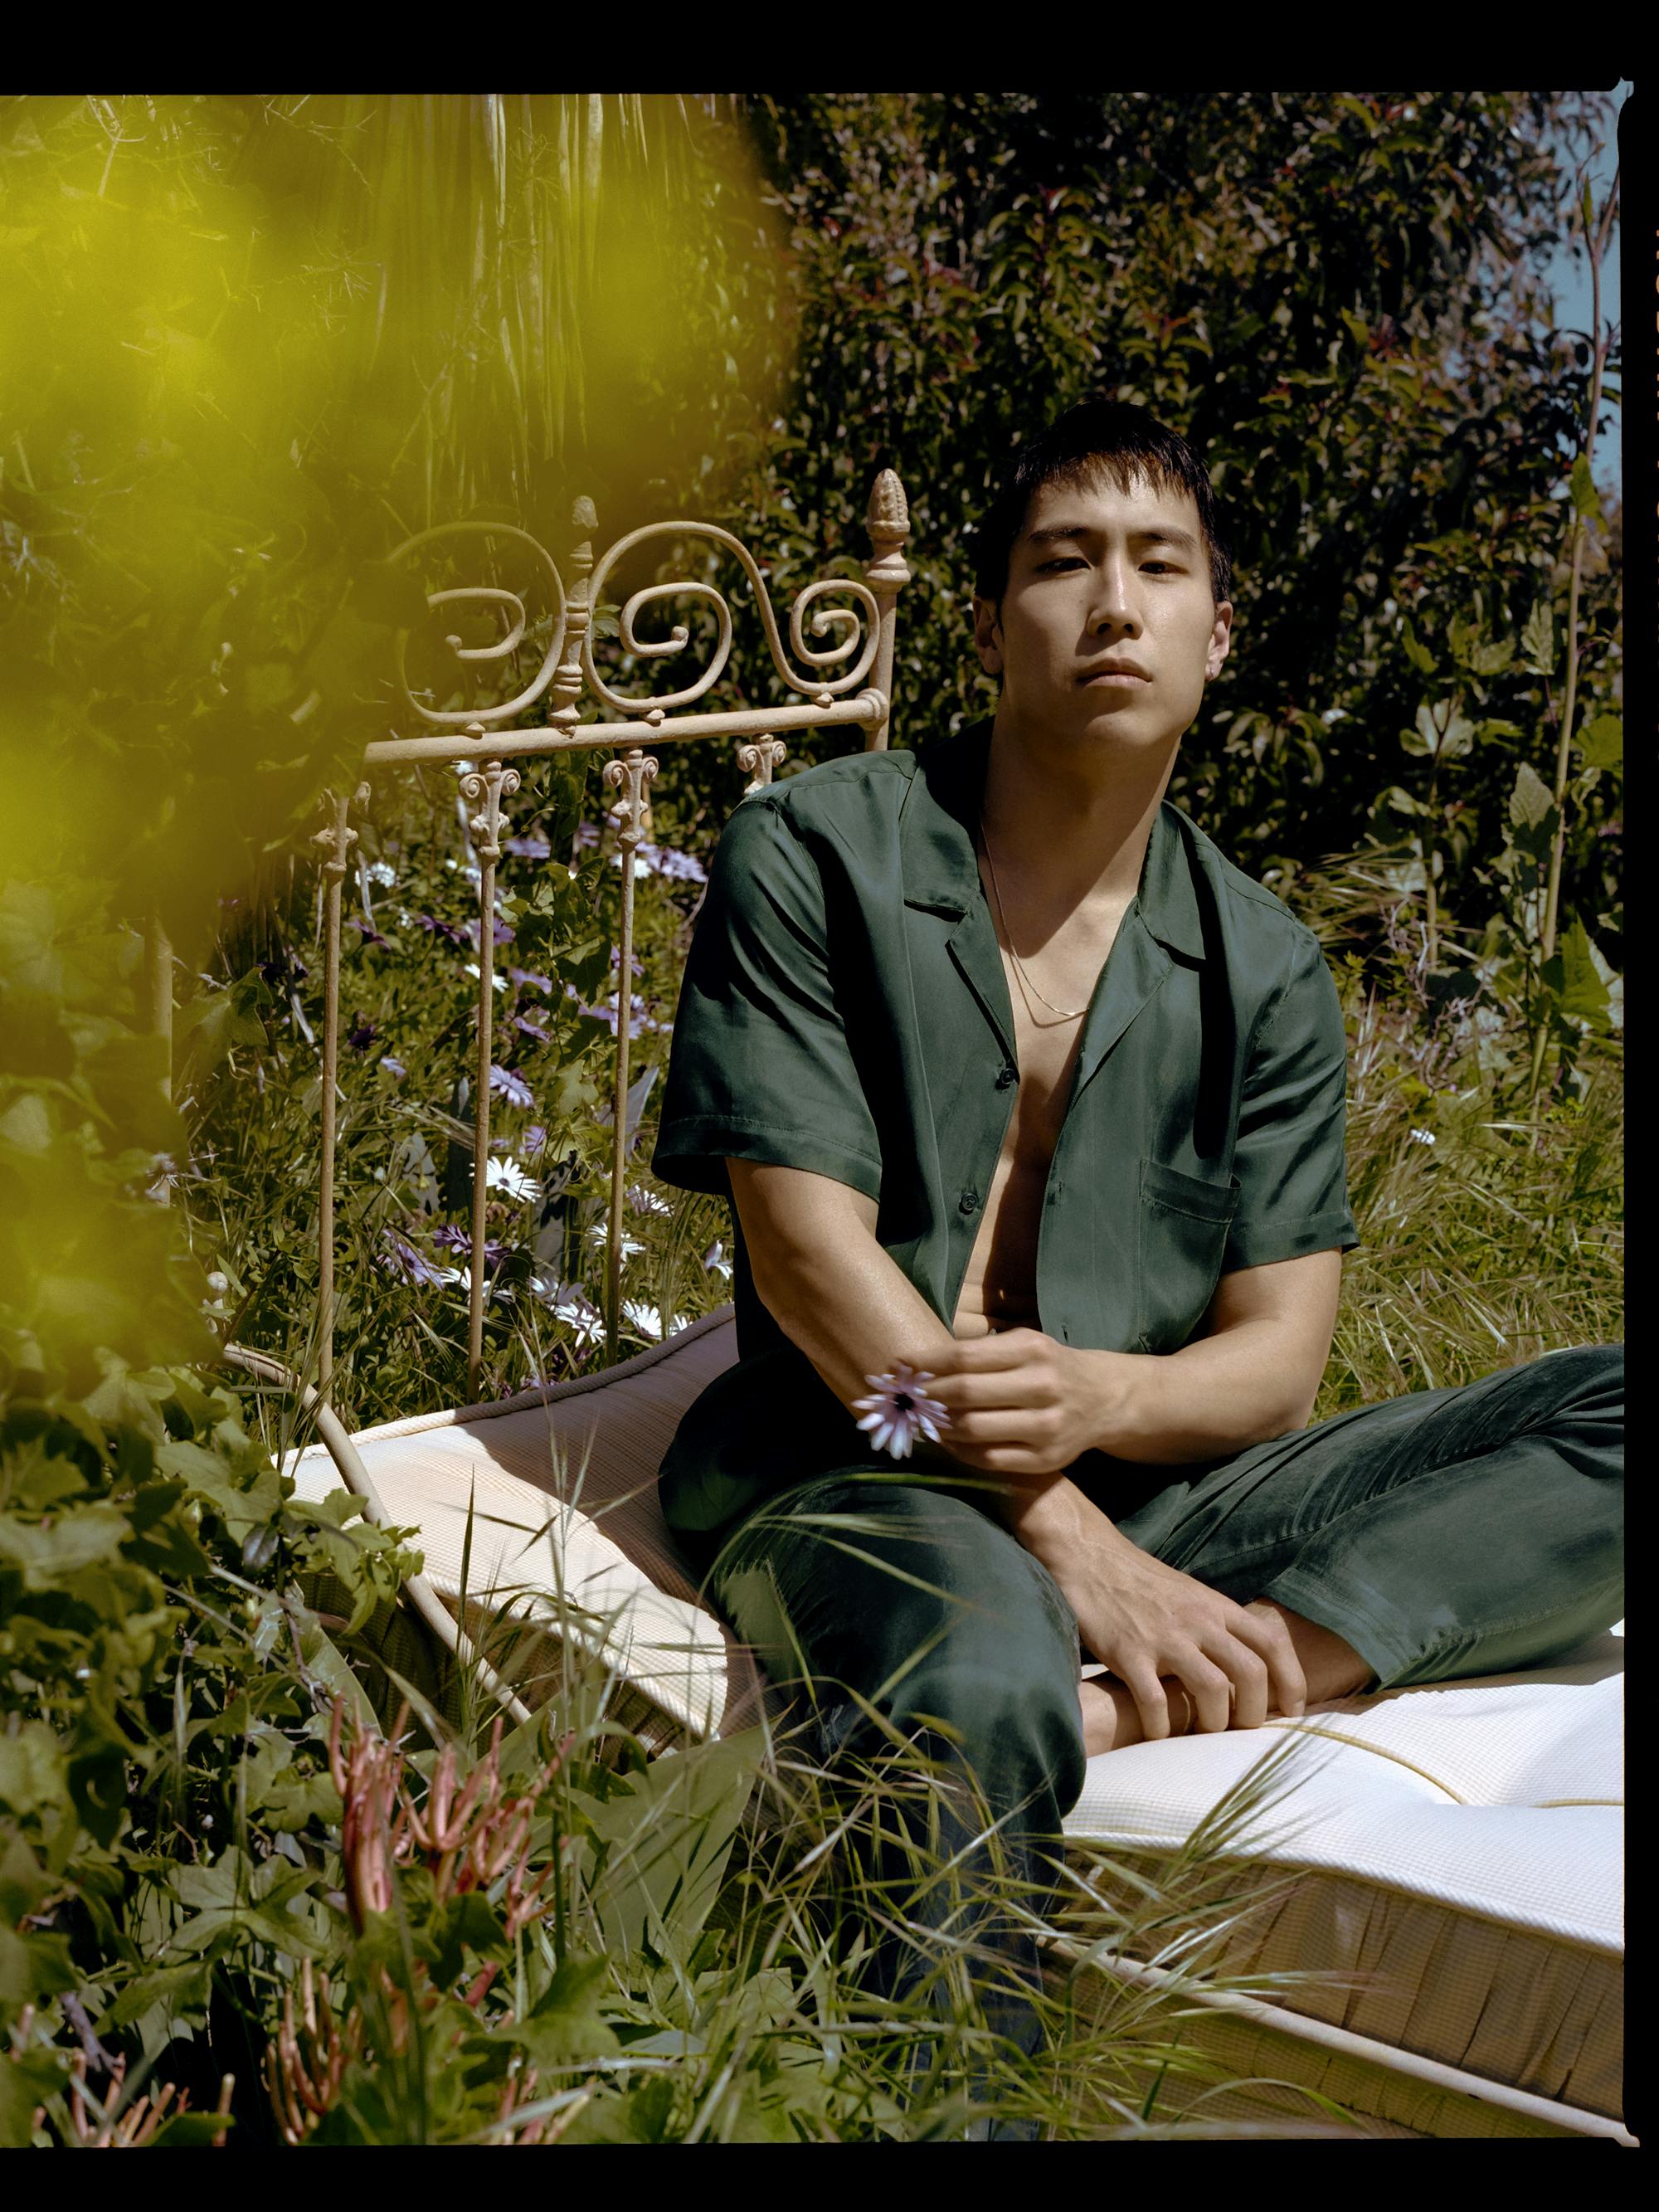 Young Mazino wears a green jumpsuit and sits on a metal bed in a field of grass and flowers.